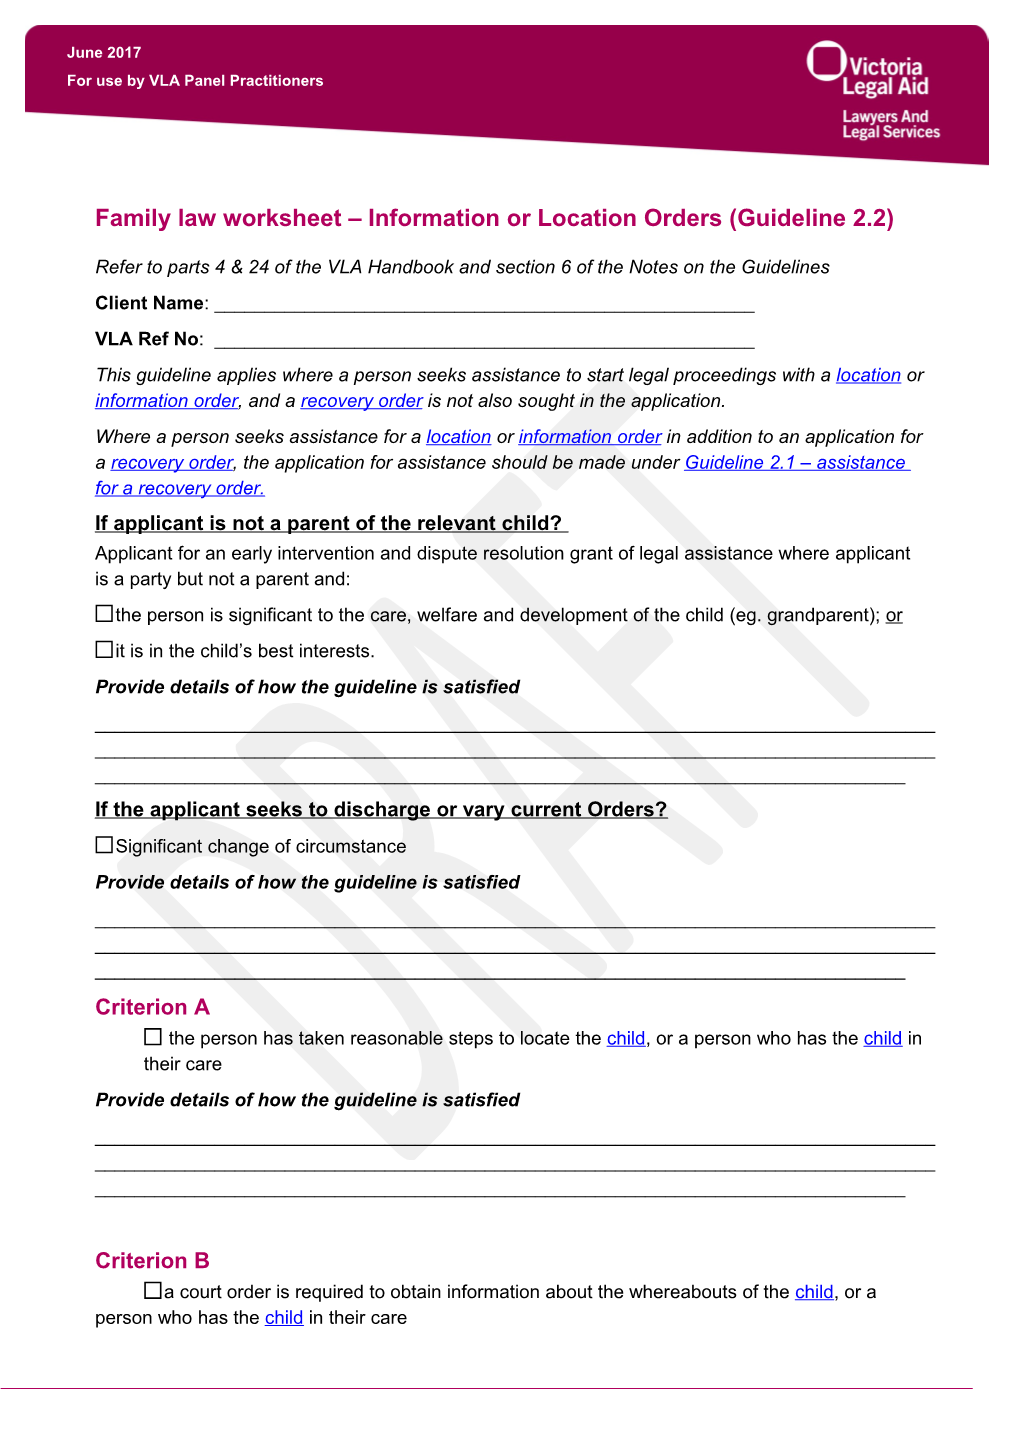 Family Law Worksheet Information Or Location Orders (Guideline 2.2)